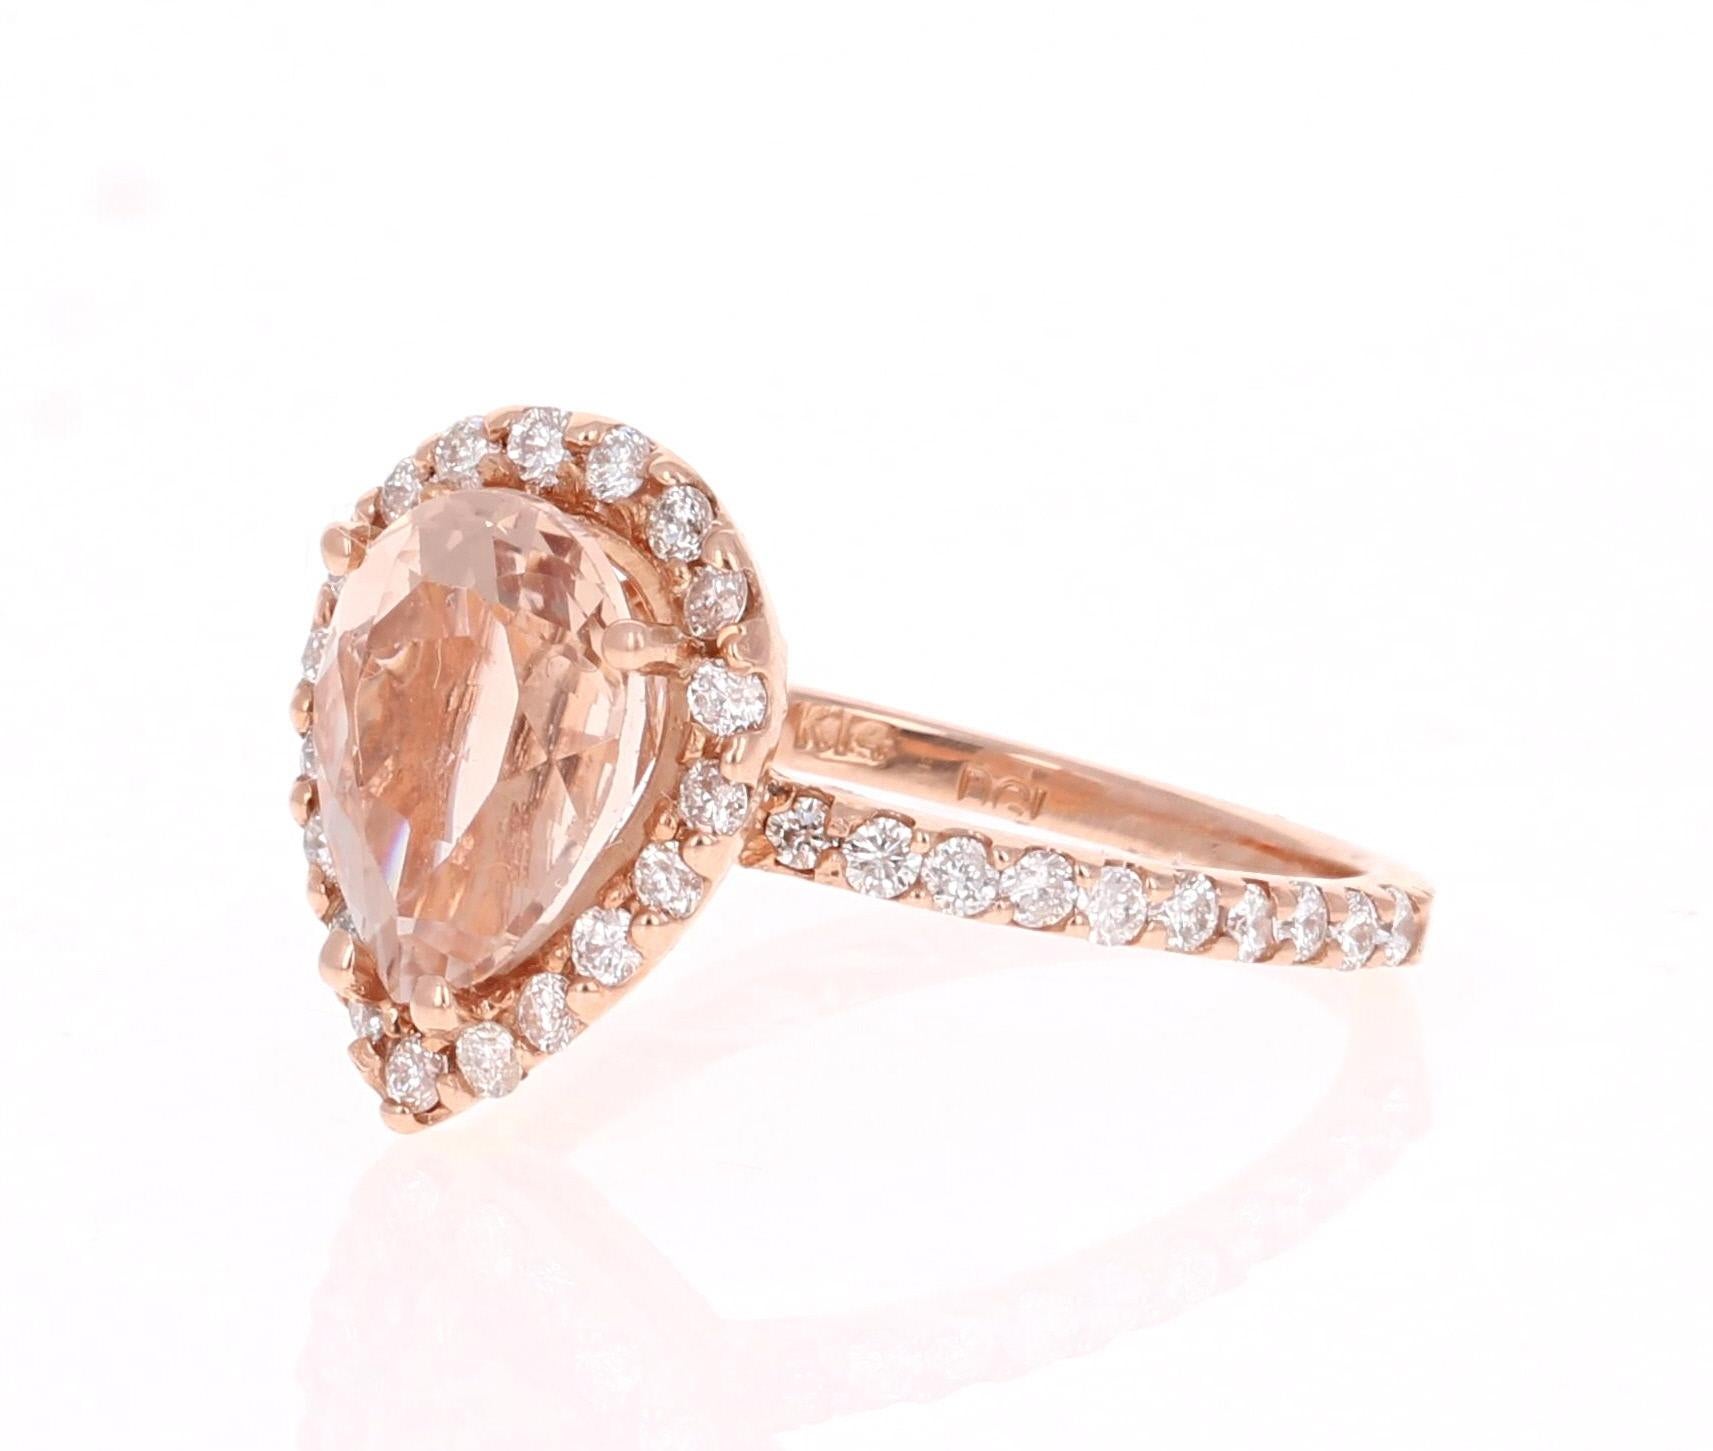 This gorgeous and classy Morganite Ring has a 2.61 Carat Pear Cut Morganite as its center and is surrounded by a halo of 39 Round Cut Diamonds that weigh 0.63 carats. The clarity and color of the diamonds are SI-F.   The total carat weight of the